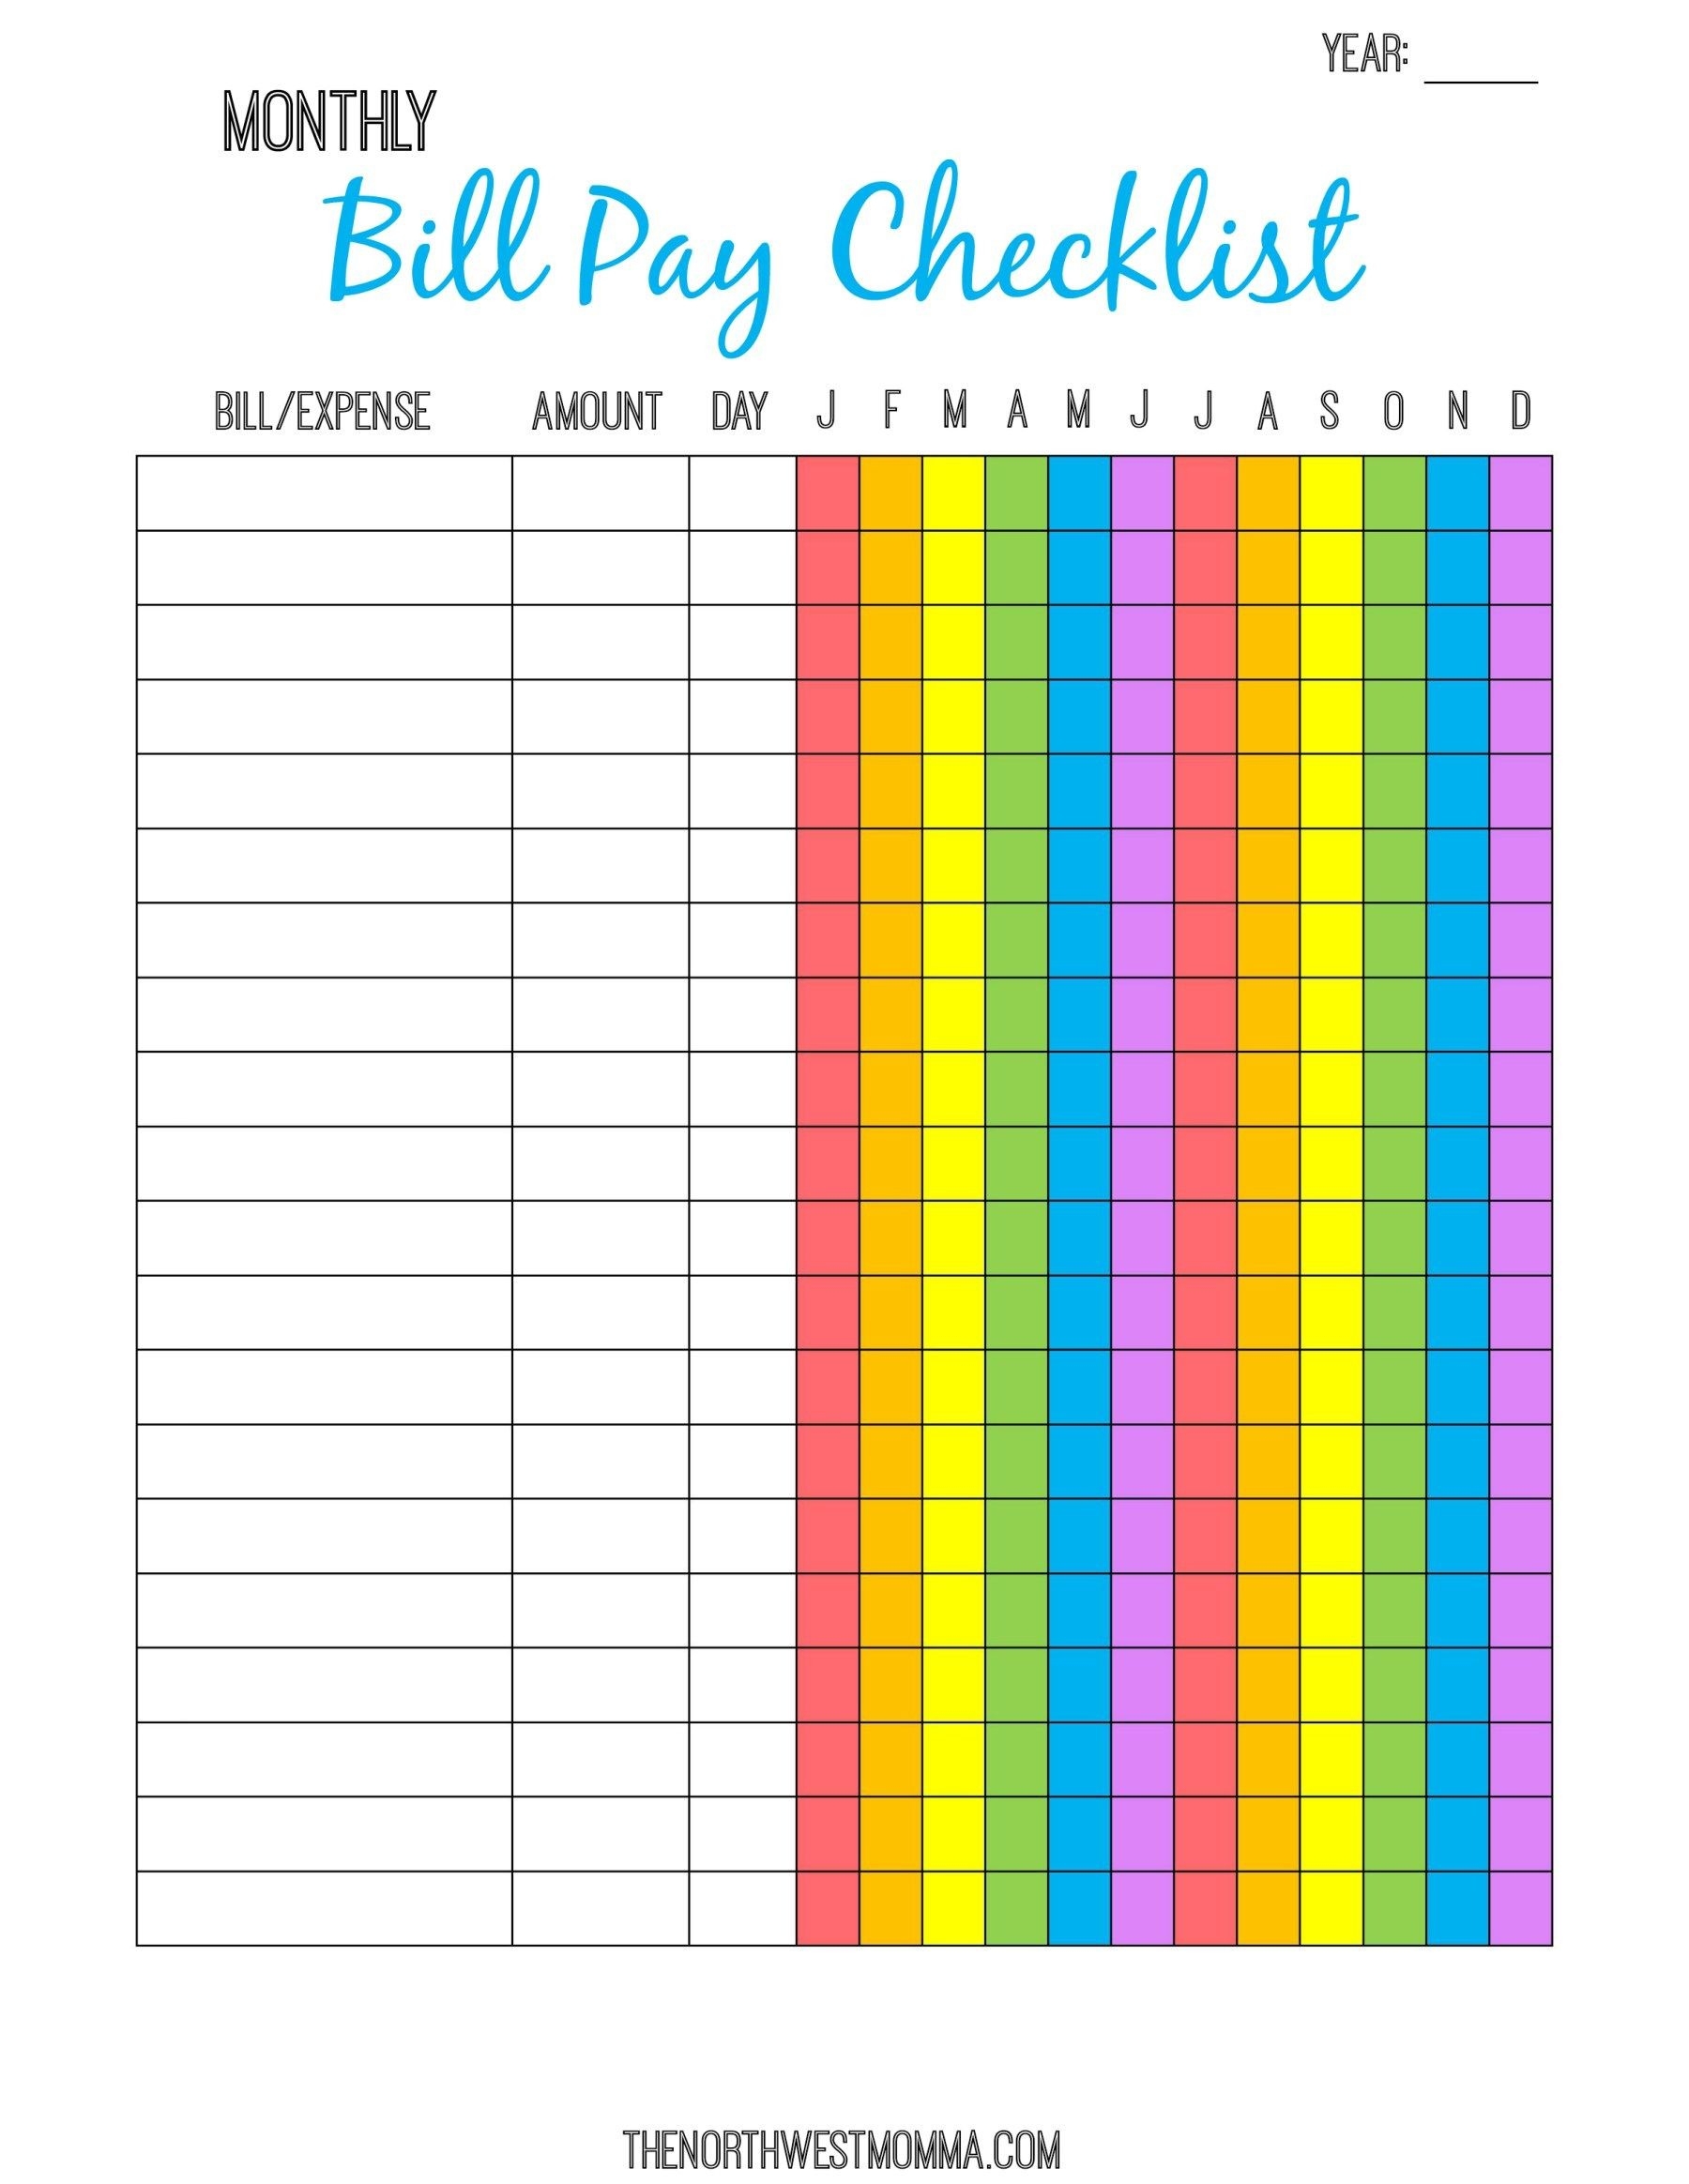 Monthly Bill Pay Checklist- Free Printable! | Organizing  Printable Monthly Bill Pay